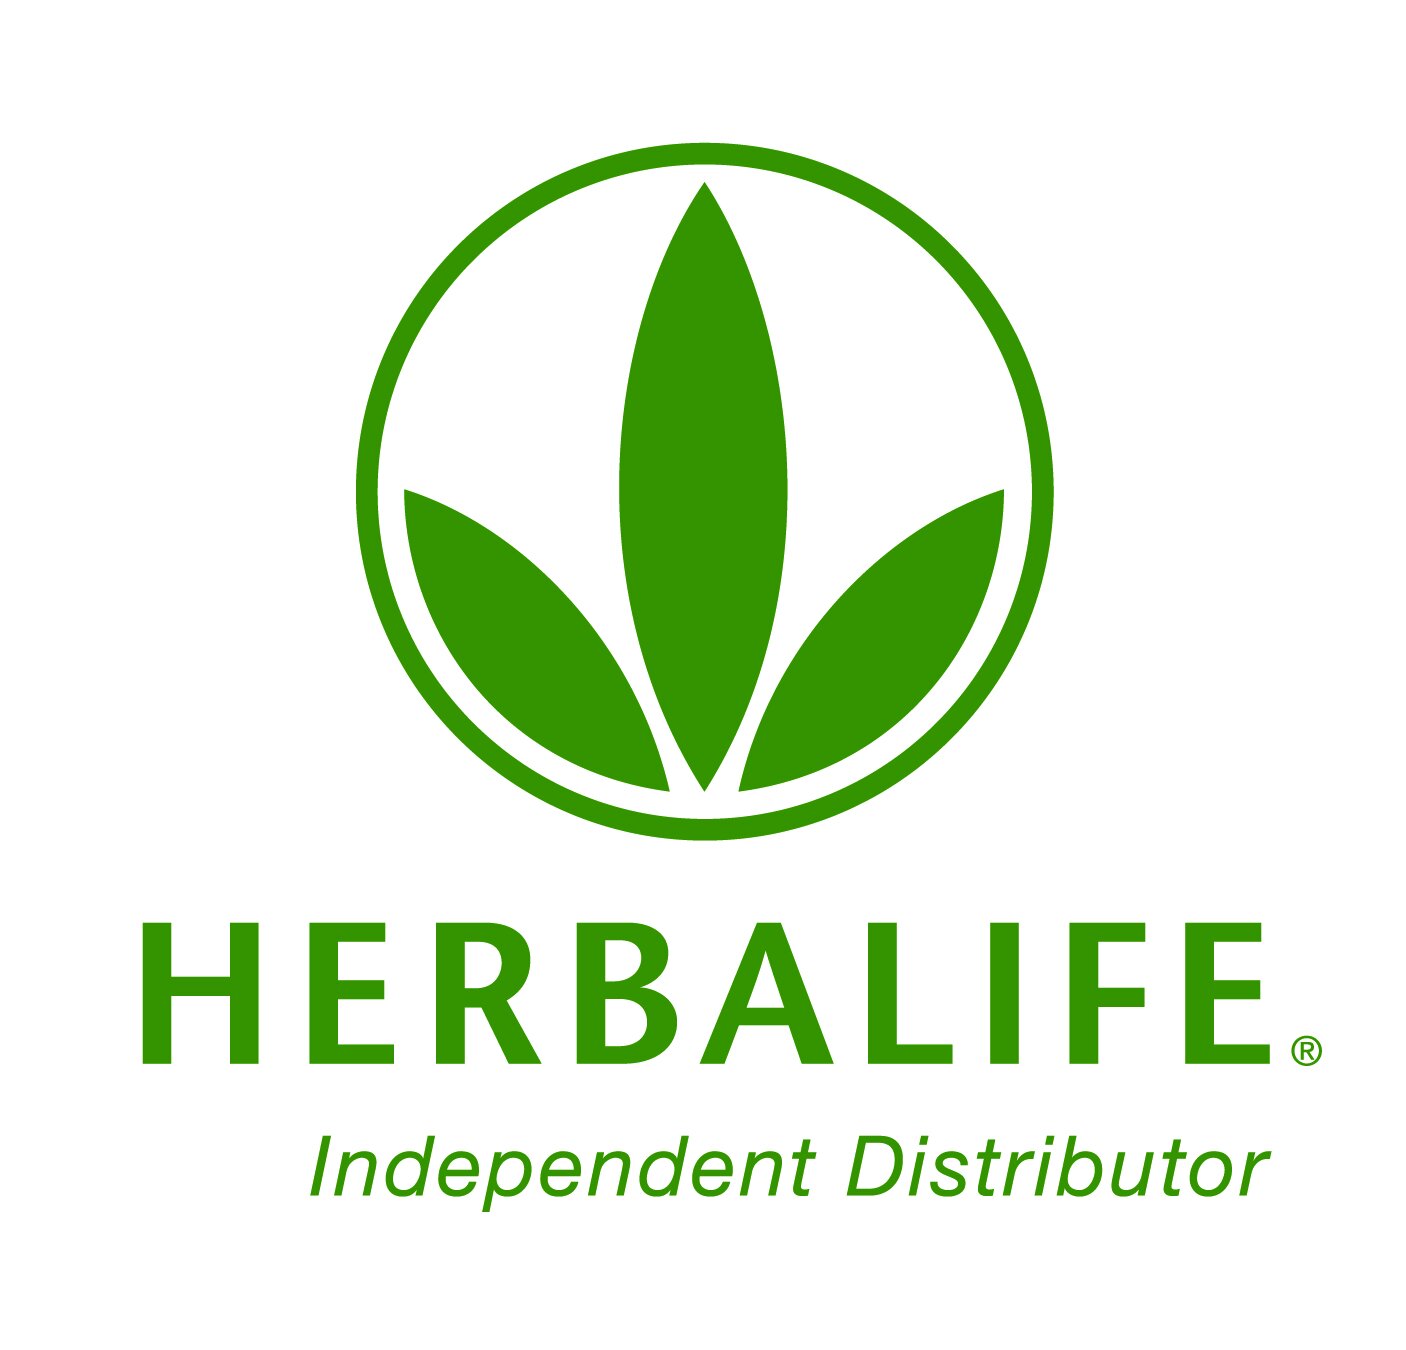 West London Herbalife Distributor and Personal Wellness Coach